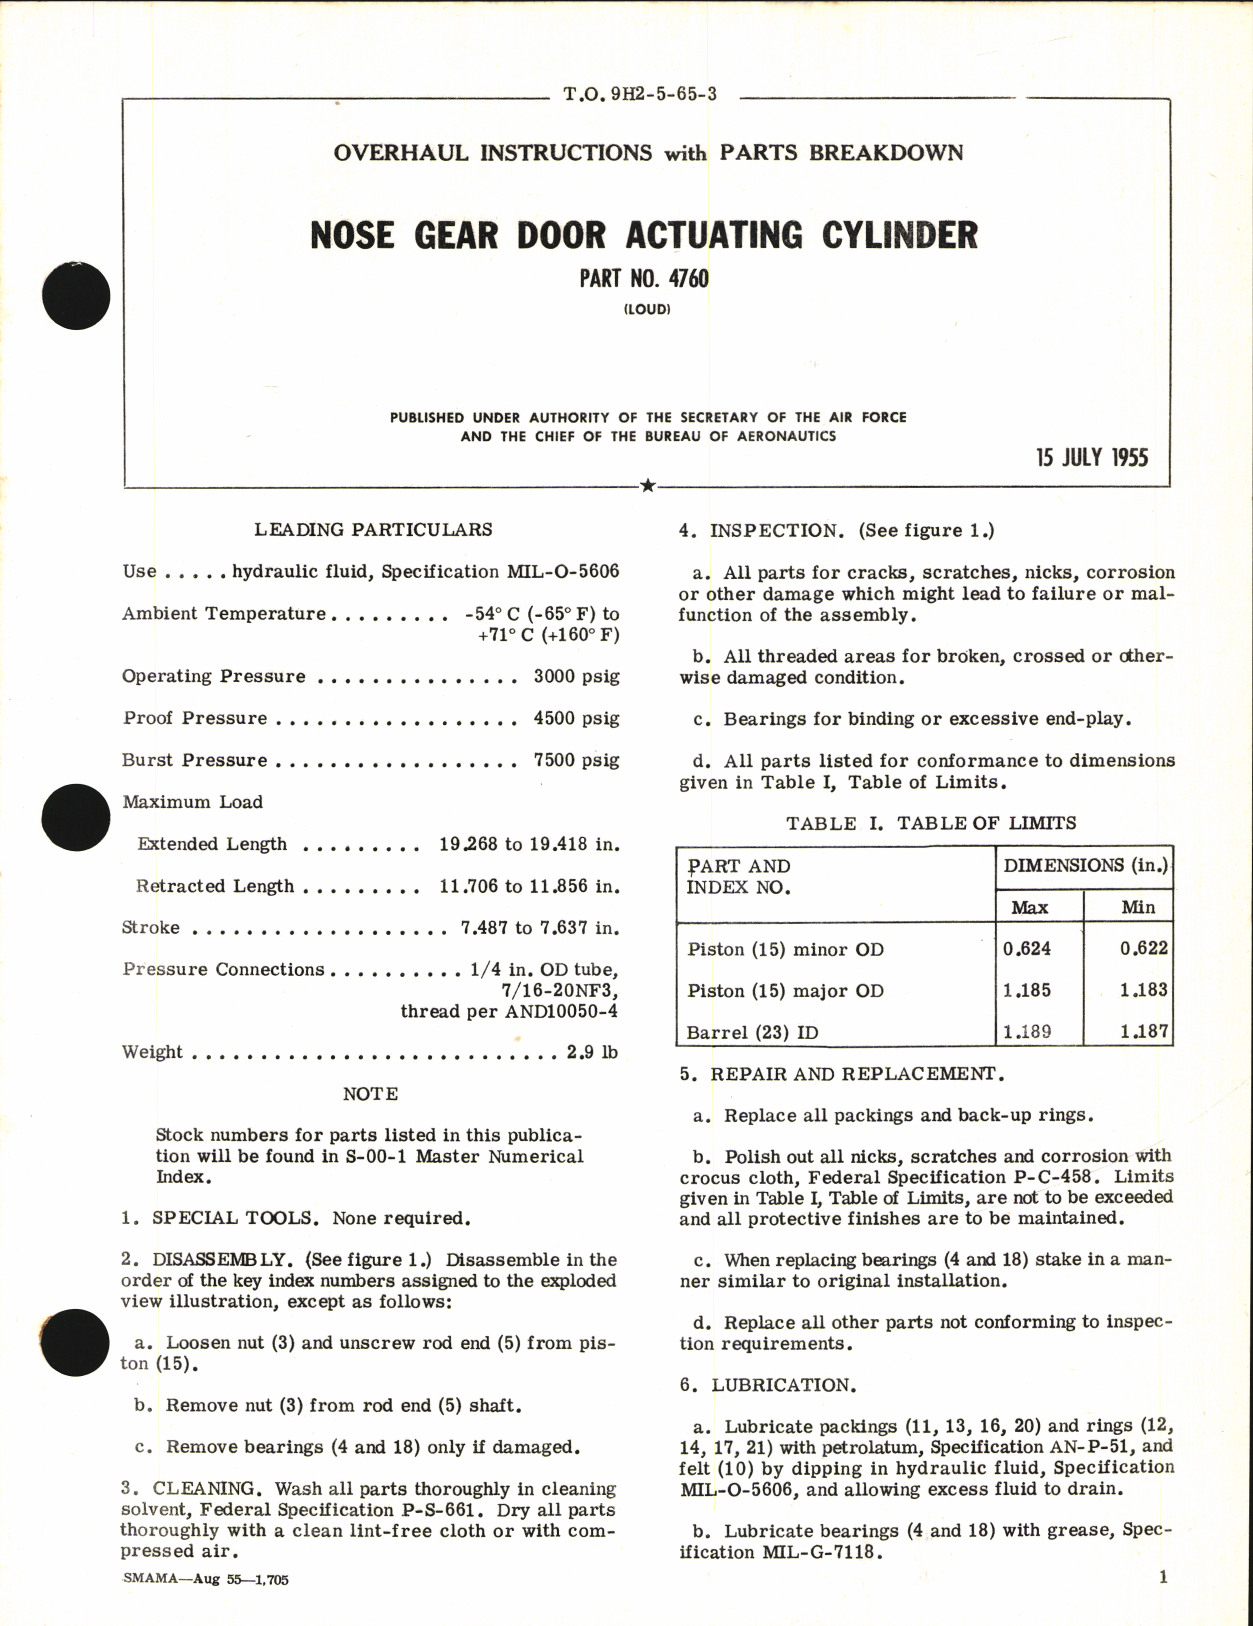 Sample page 1 from AirCorps Library document: Overhaul Instructions with Parts Breakdown for Nose Gear door Actuating cylinder Part no. 4760